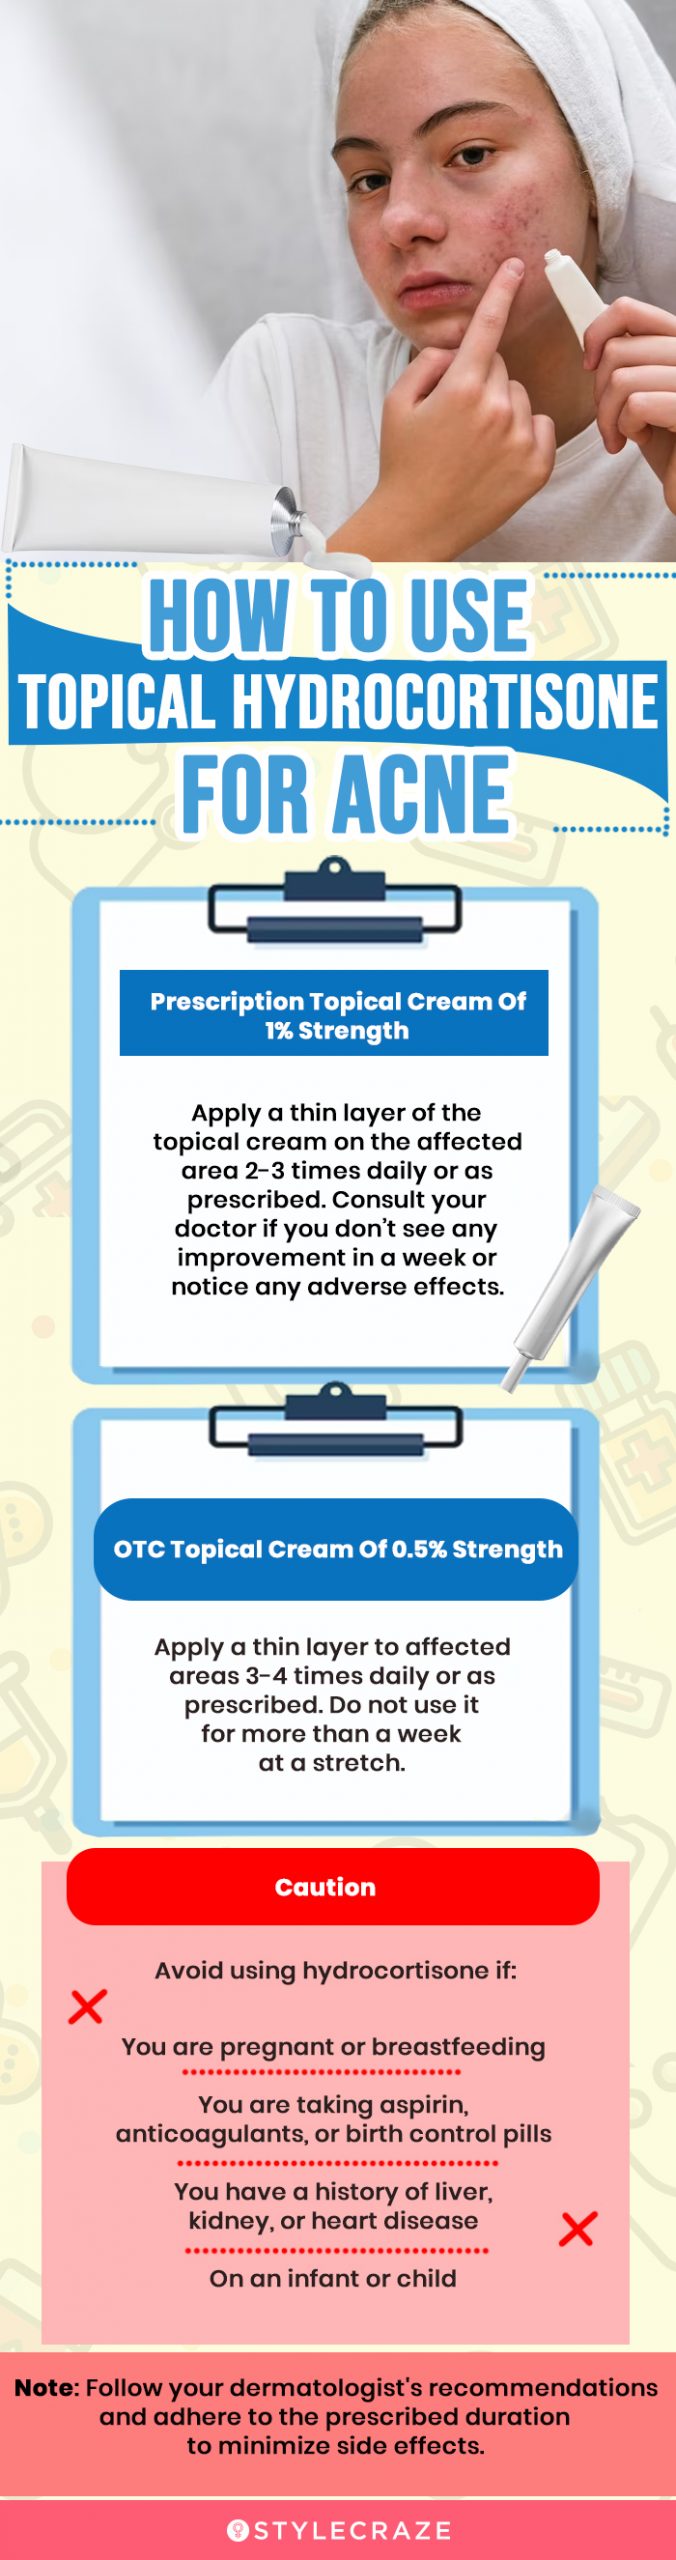 how to use topical hydrocortisone for acne (infographic)